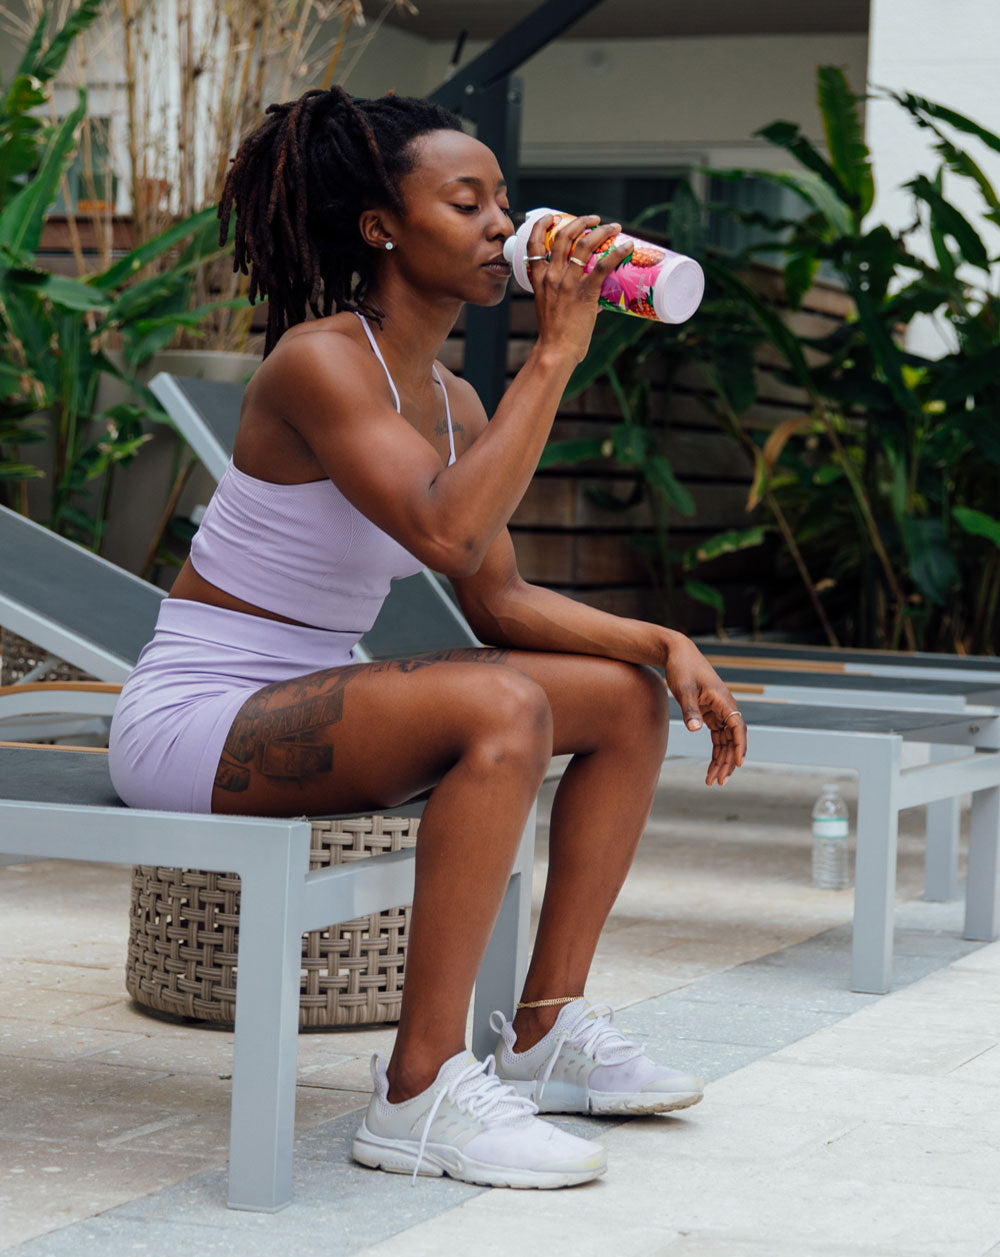 an image of a woman in workout attire, sitting on a bench, taking a refreshing drink of water from an insulated Ice Shaker bottle